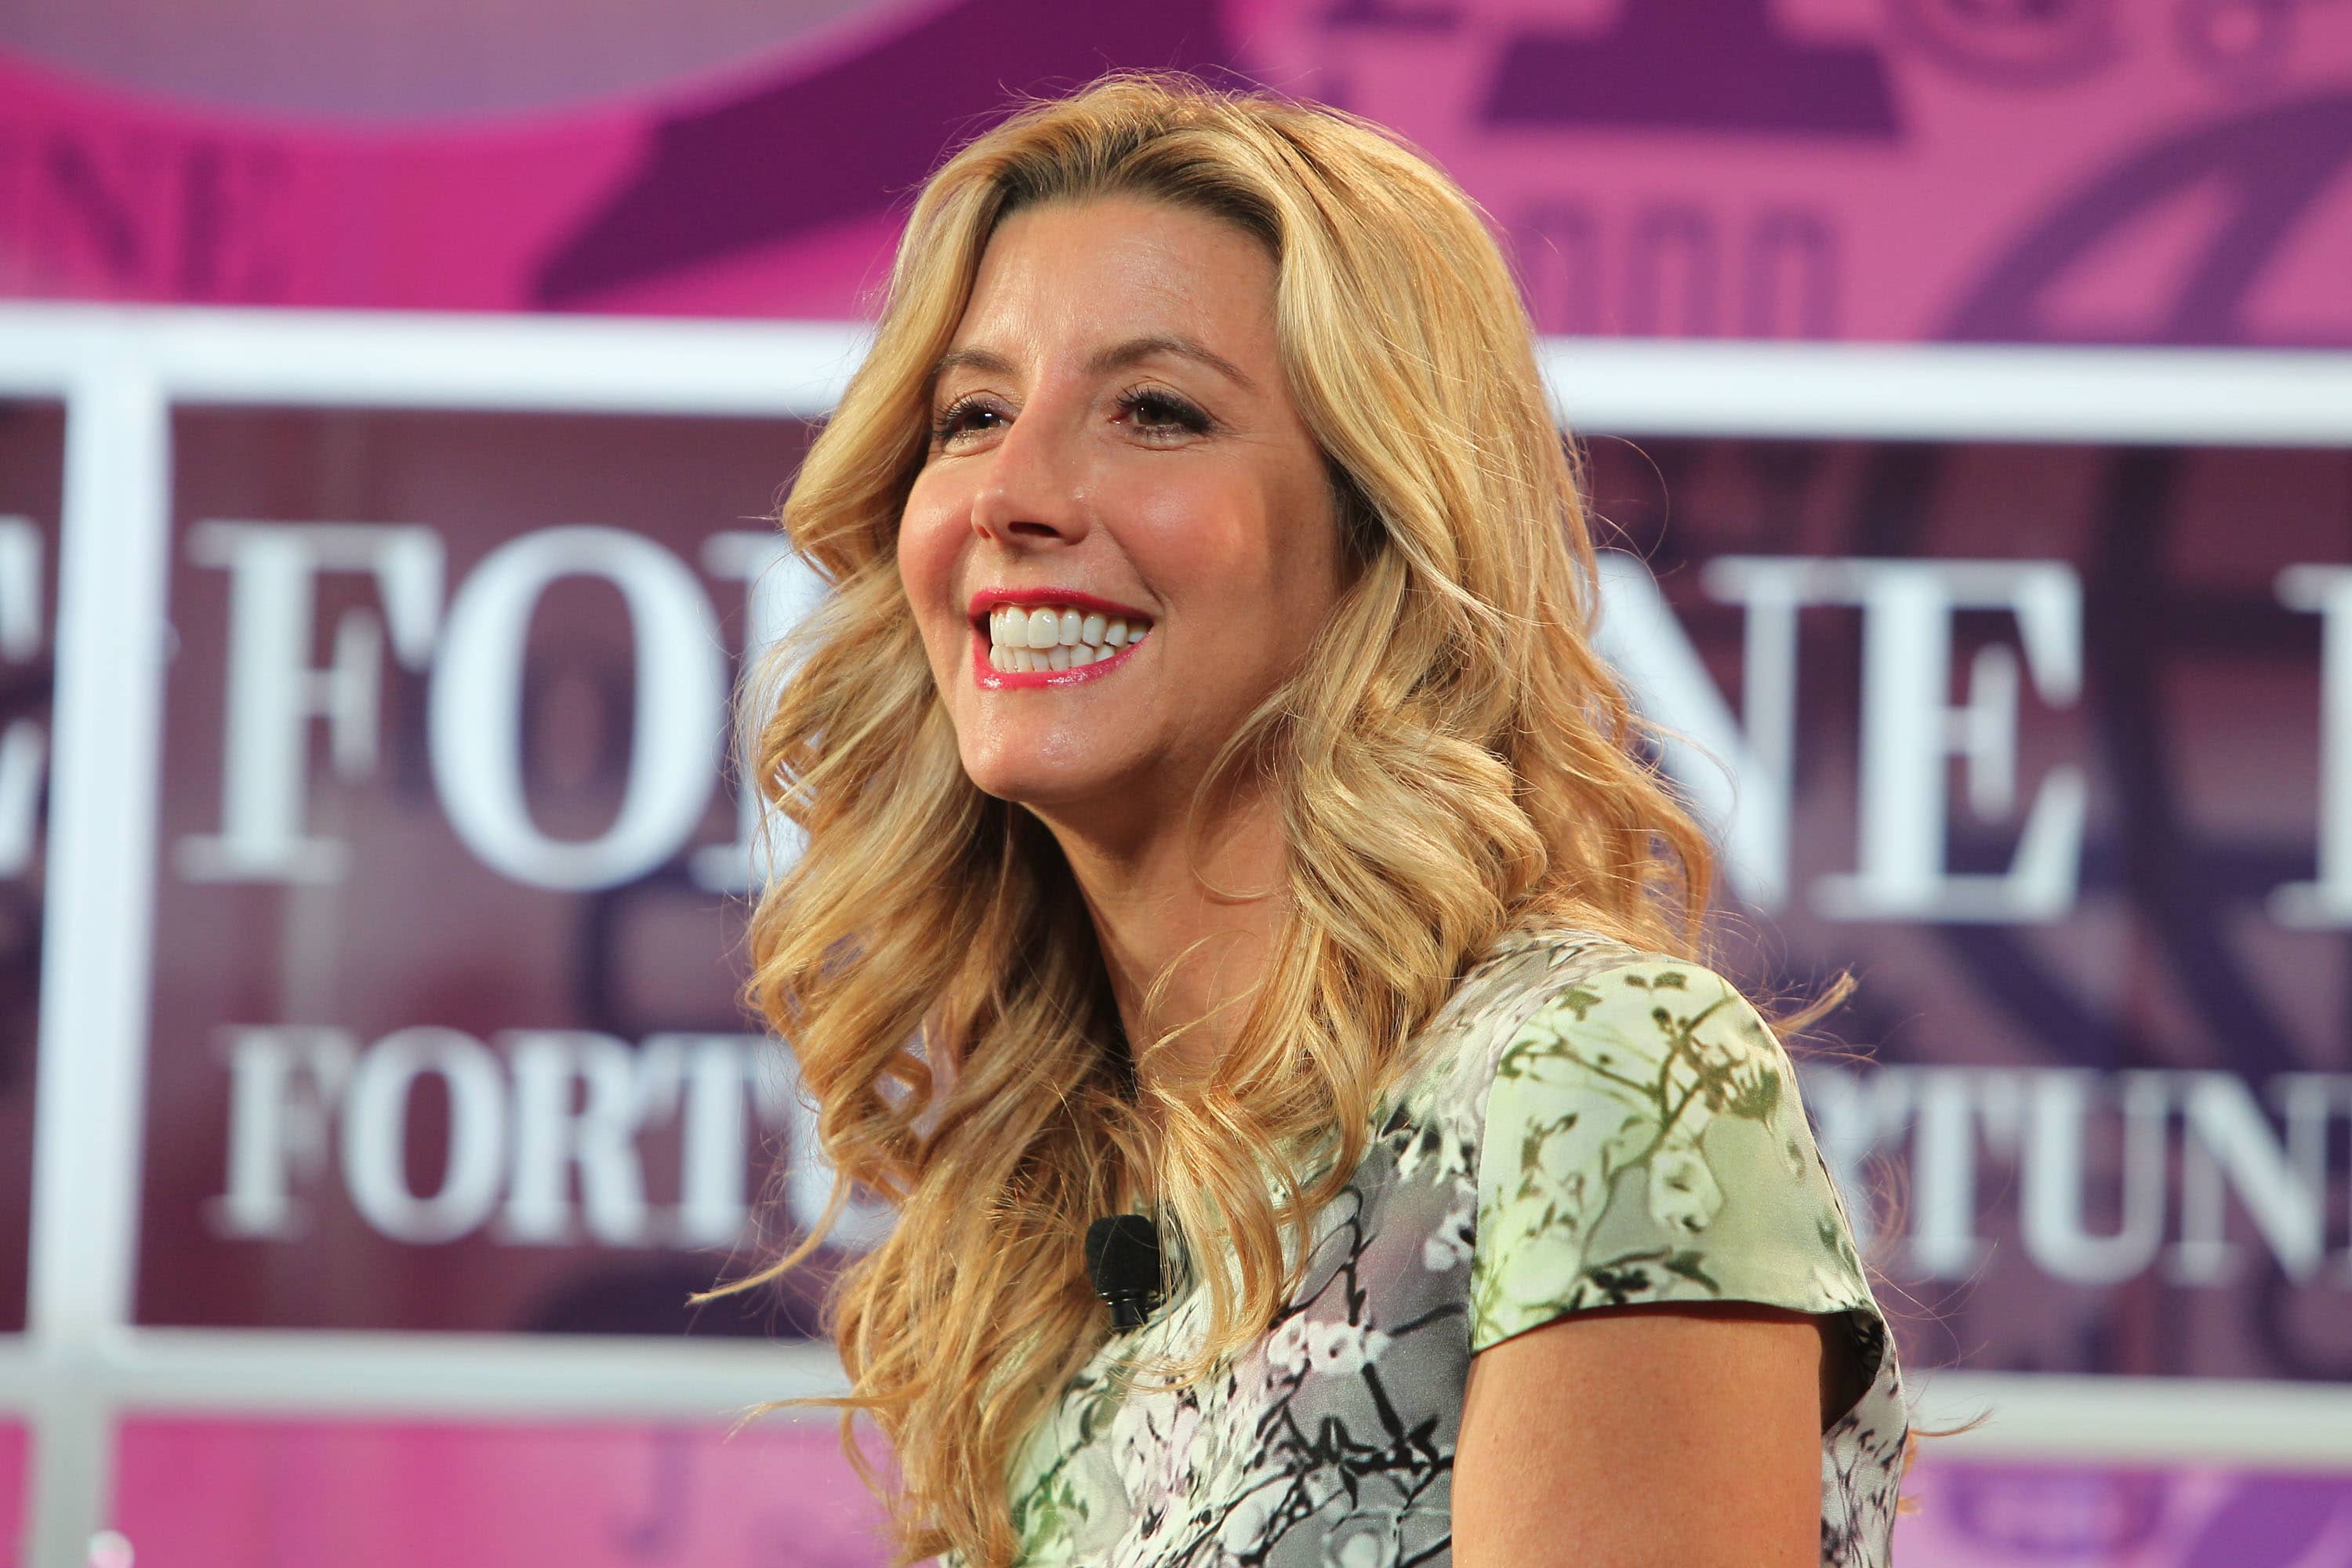 Spanx founder Sara Blakely says business will expand into denim and more after Blackstone deal